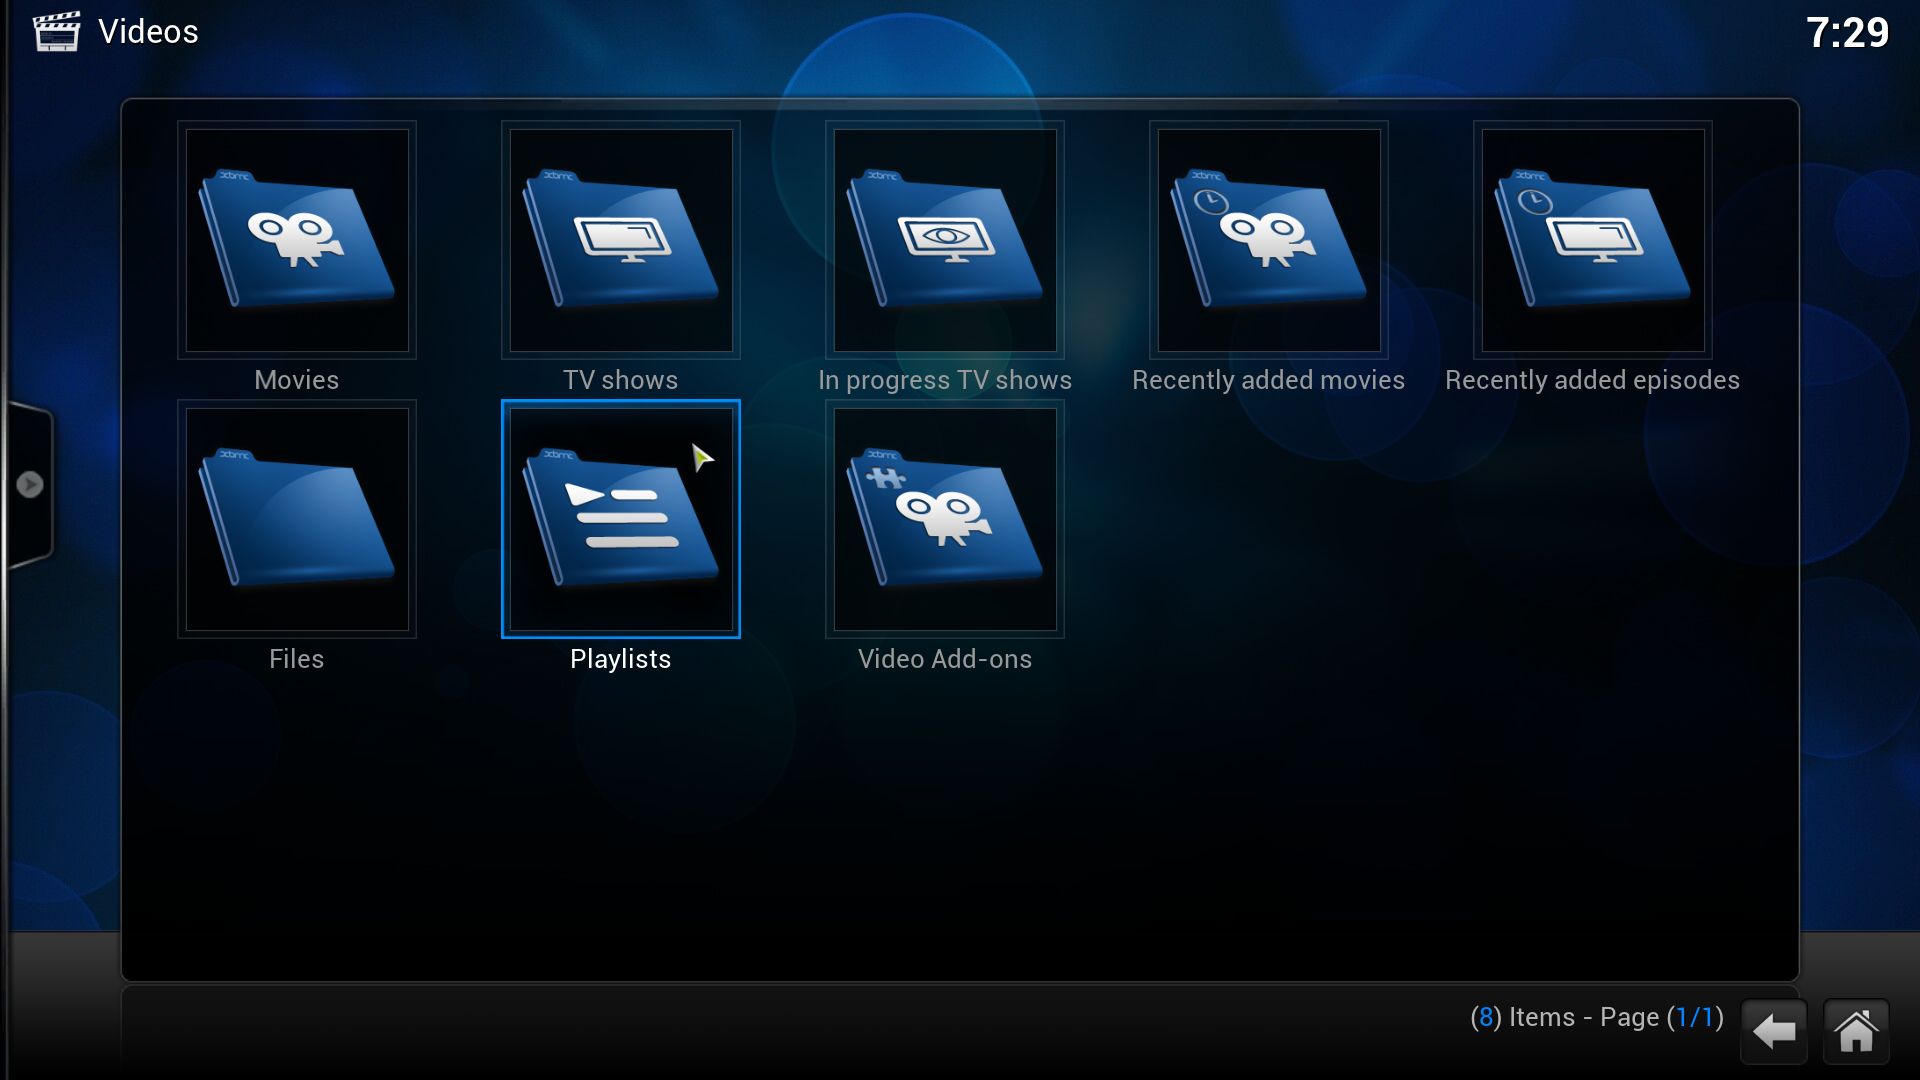 Step 2: Select "Playlists" from the options.